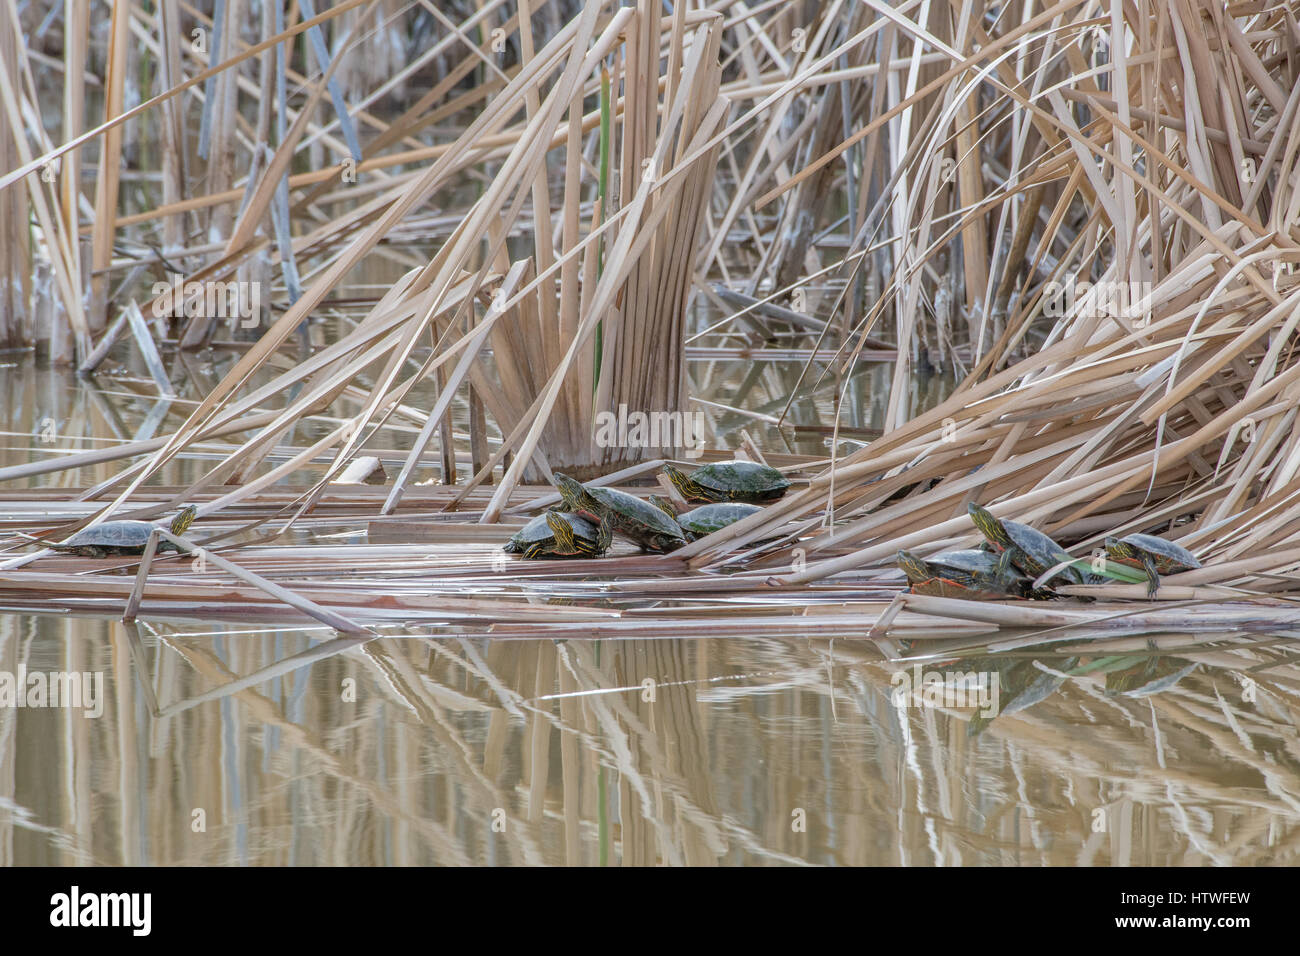 Western dipinto Turtle basking sui morti Cattails. Foto Stock